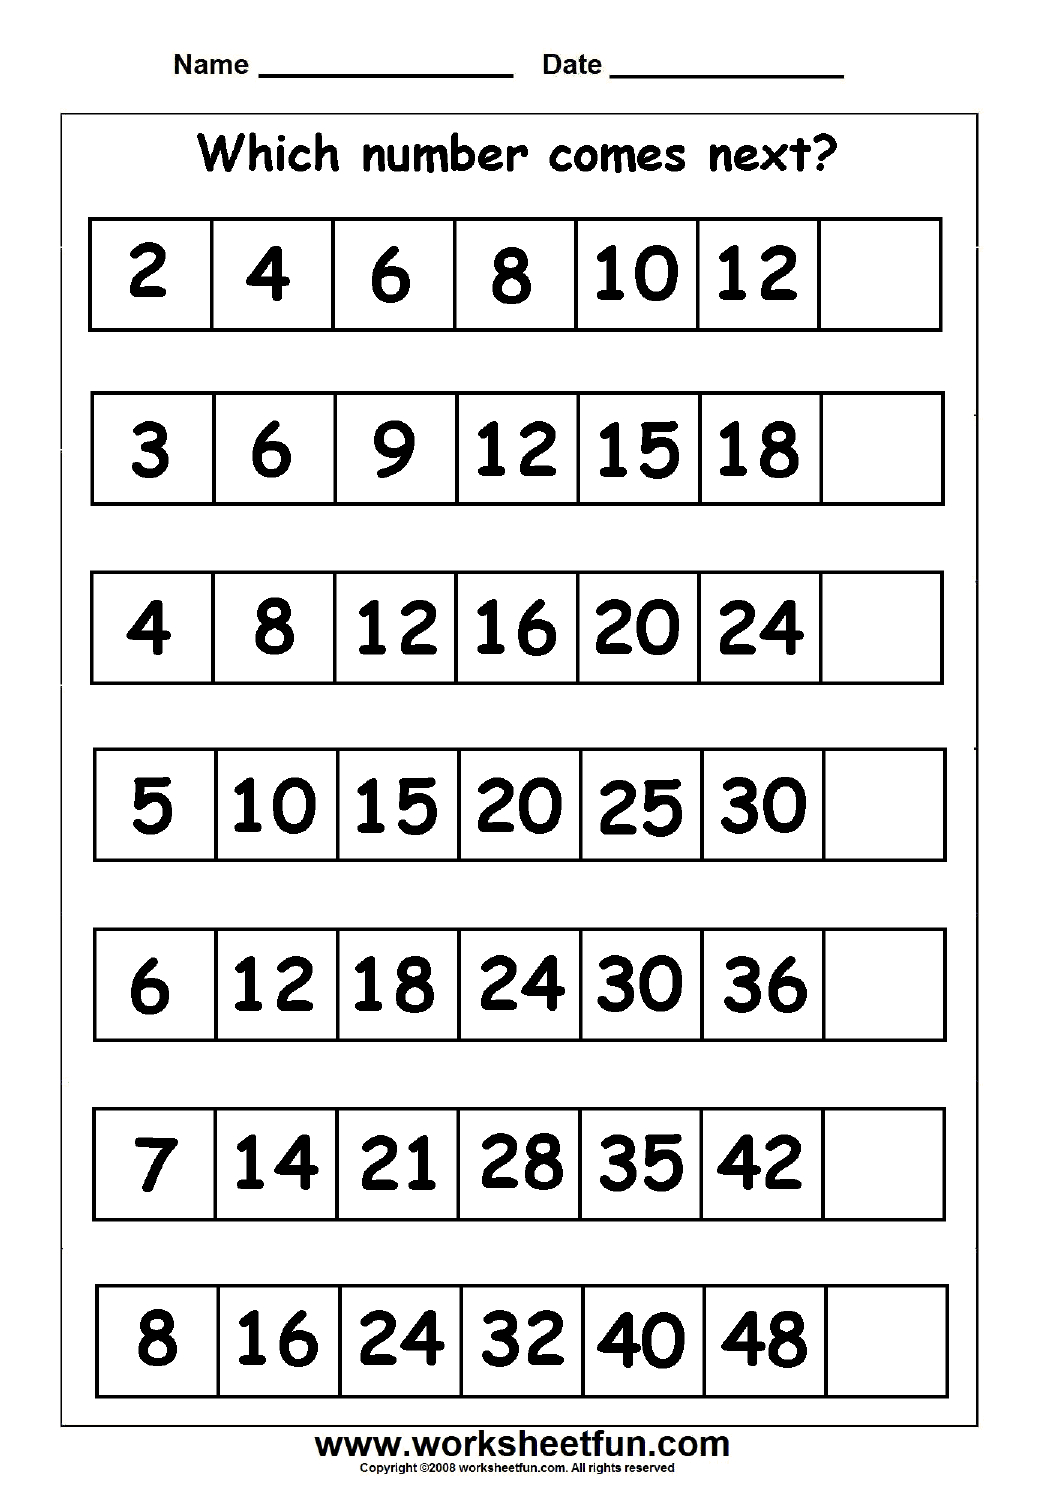 Which Number Comes Next 9 Worksheets Printable Worksheets 